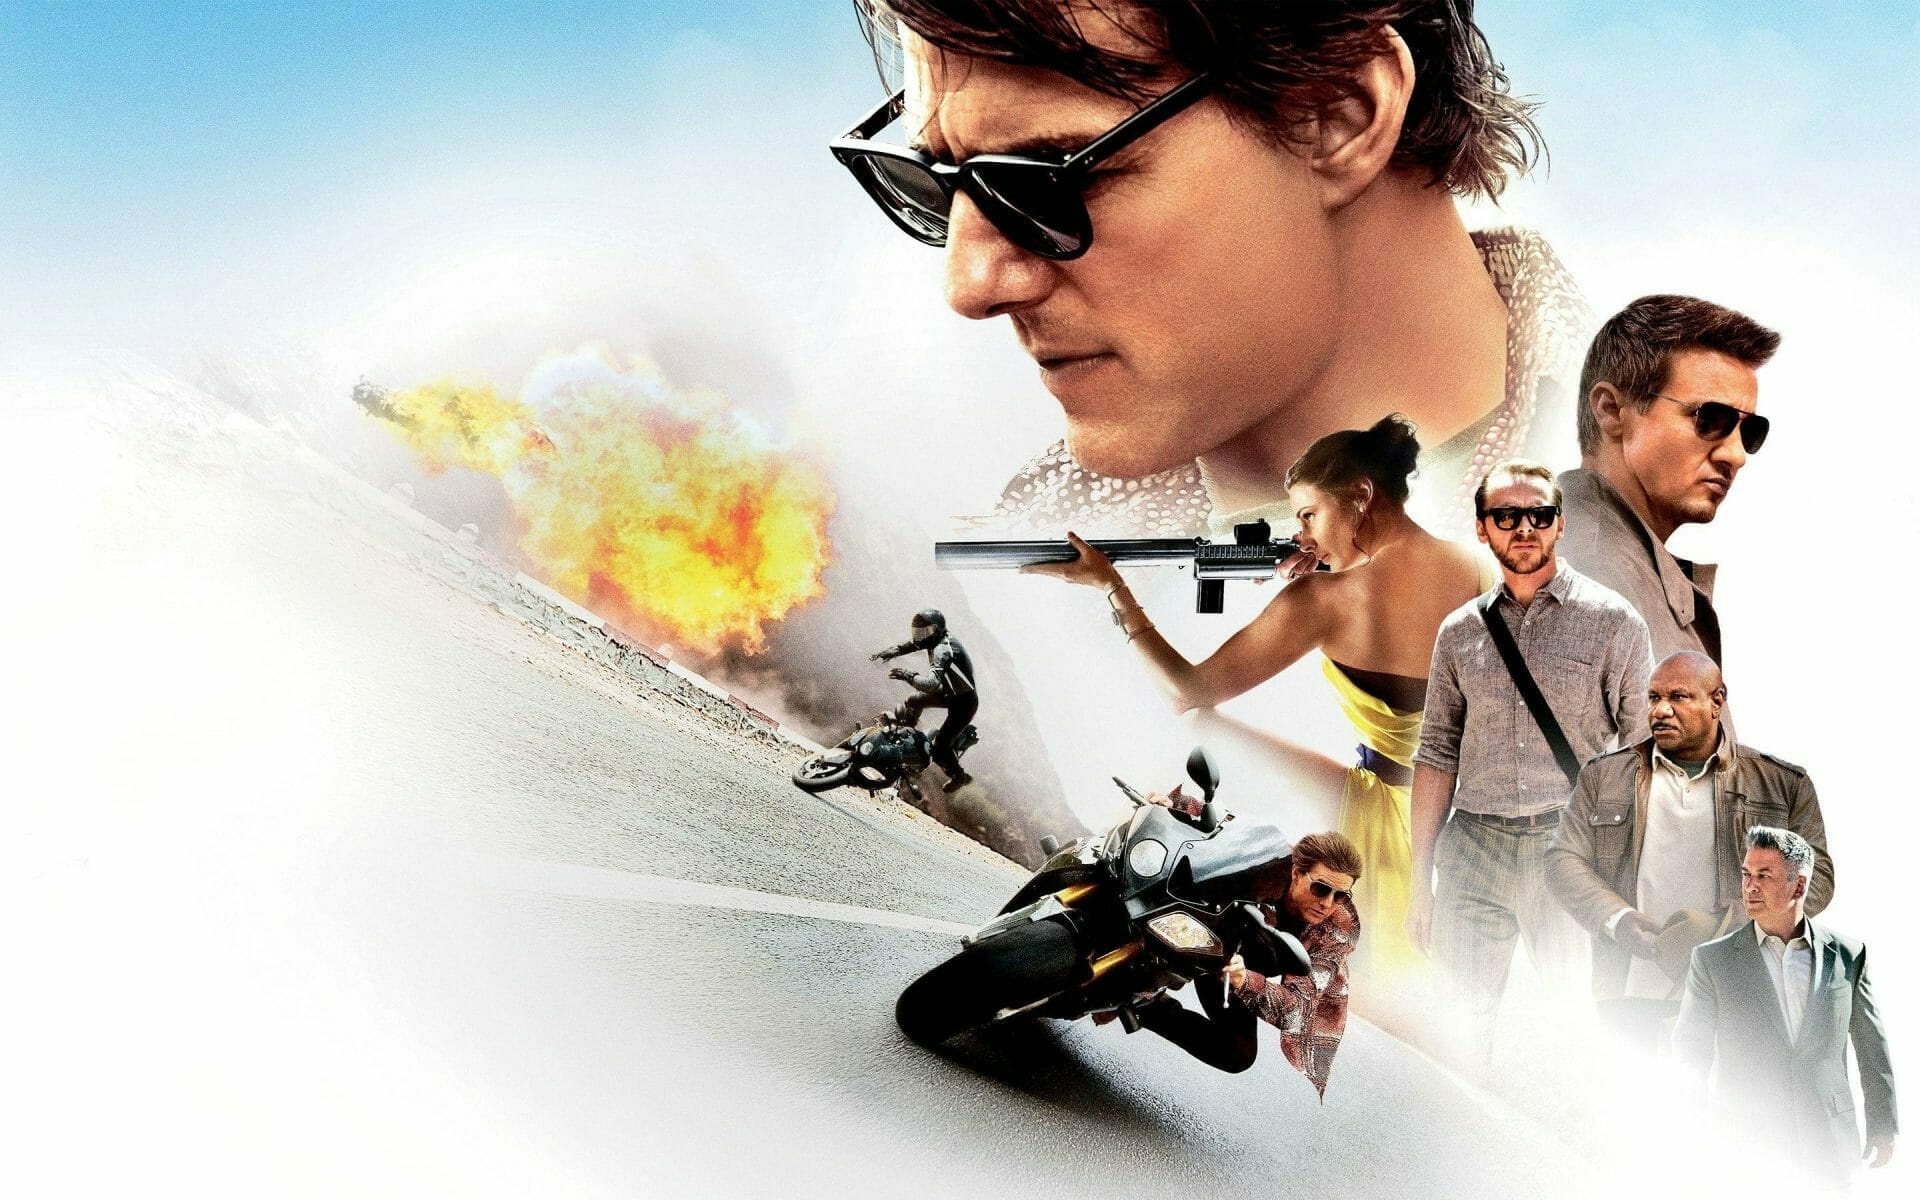 Tom Cruise movies, Gizmo Story, Best of all time, 1920x1200 HD Desktop